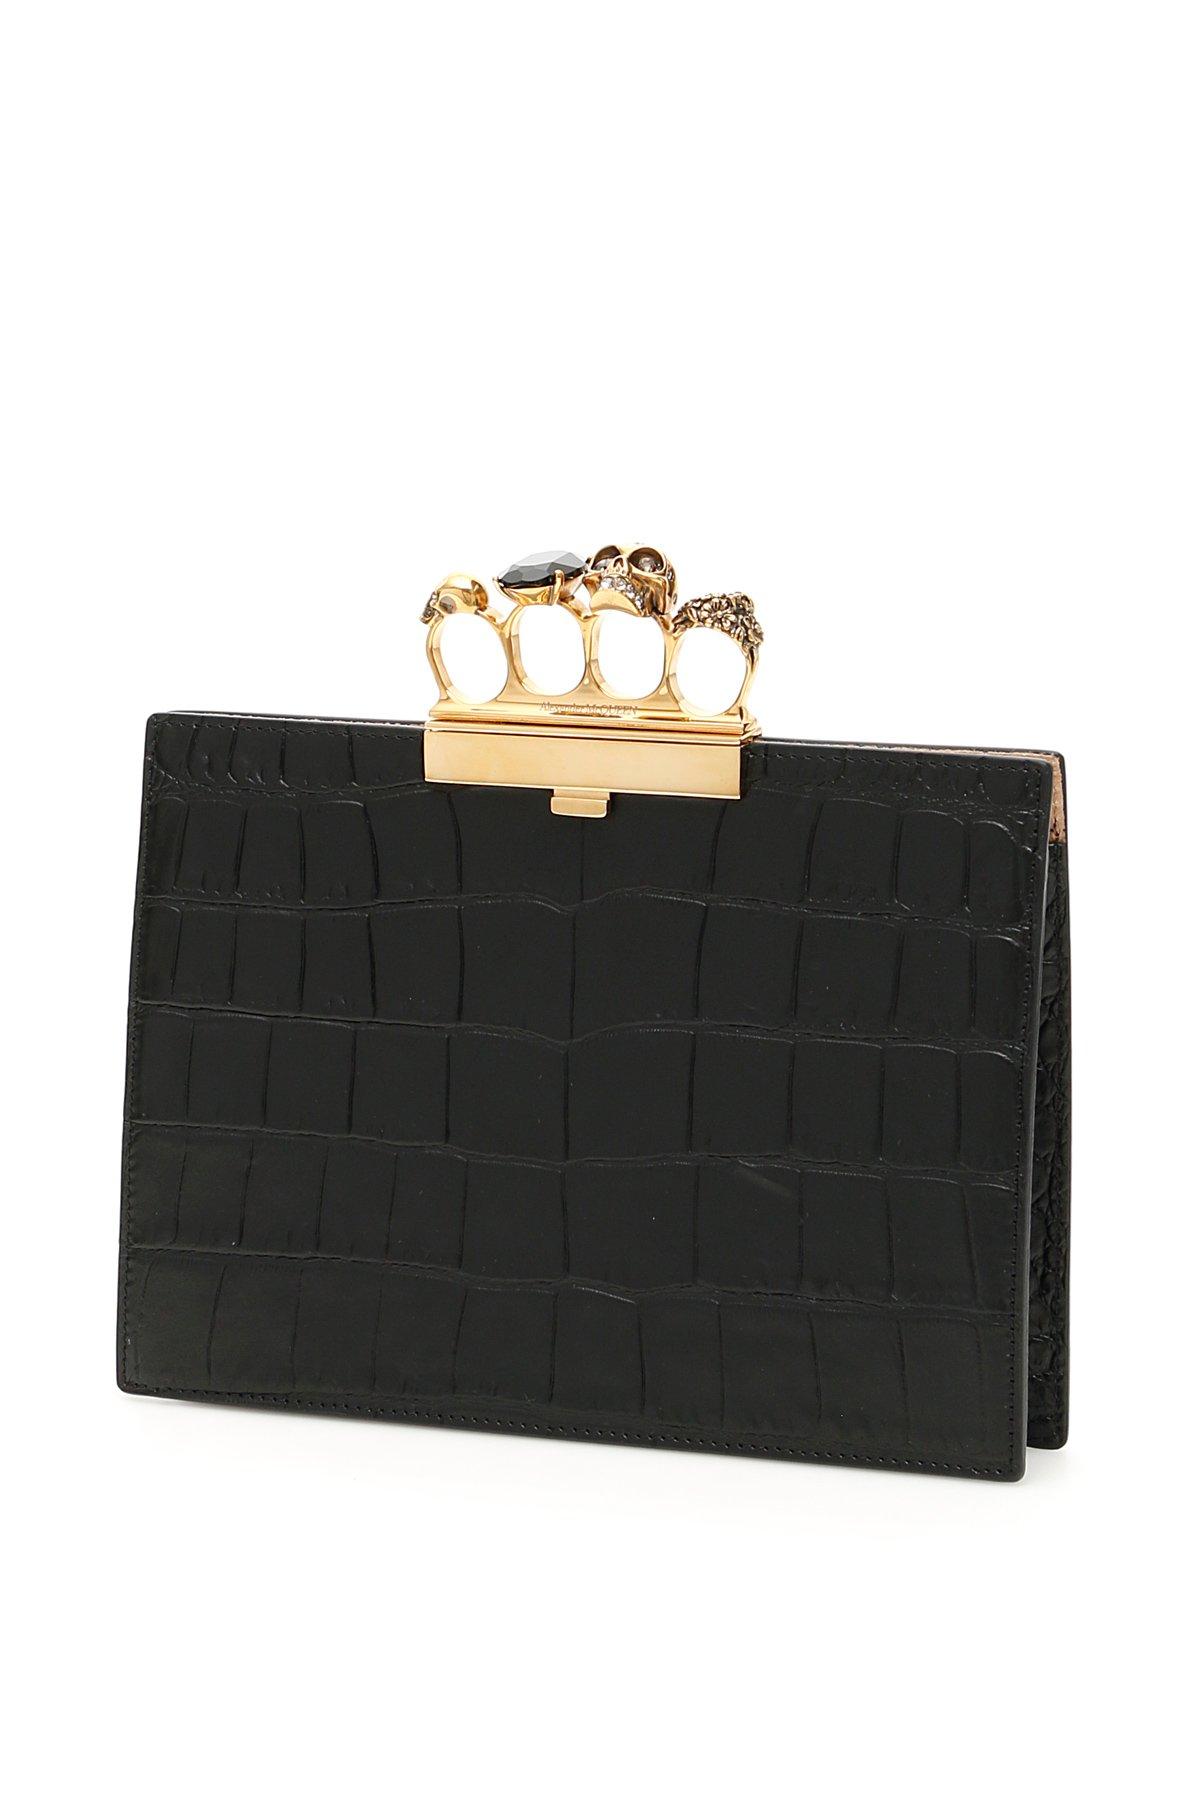 Alexander McQueen Leather Four Ring Embellished Clutch Bag in Black - Lyst